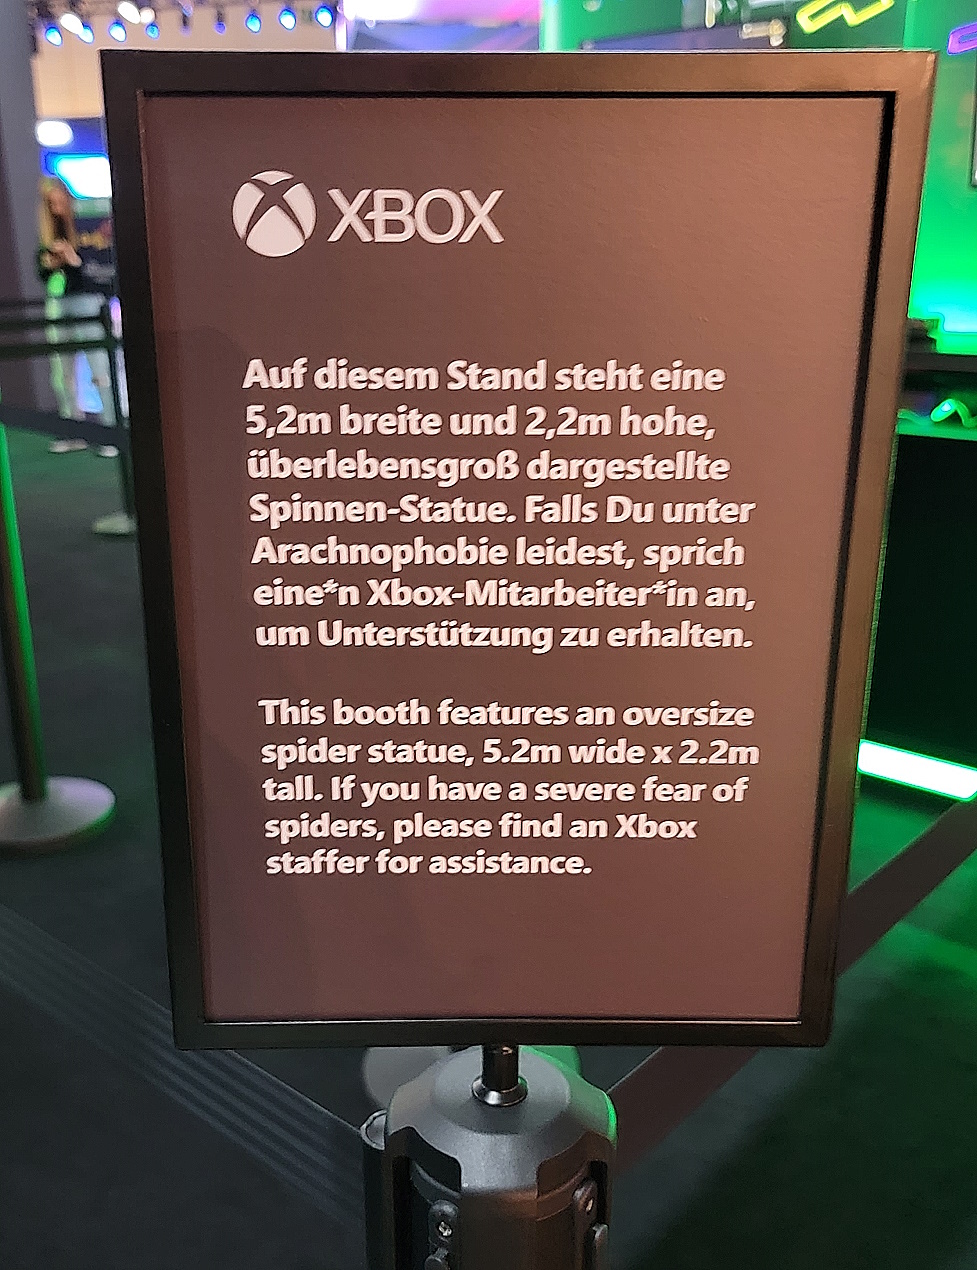 A black sign with white text which reads in both English and German, "This booth features an oversize spider statue, 5.2m wide x 2.2m tall. If you have a severe fear of spiders, please find an Xbox staffer for assistance.